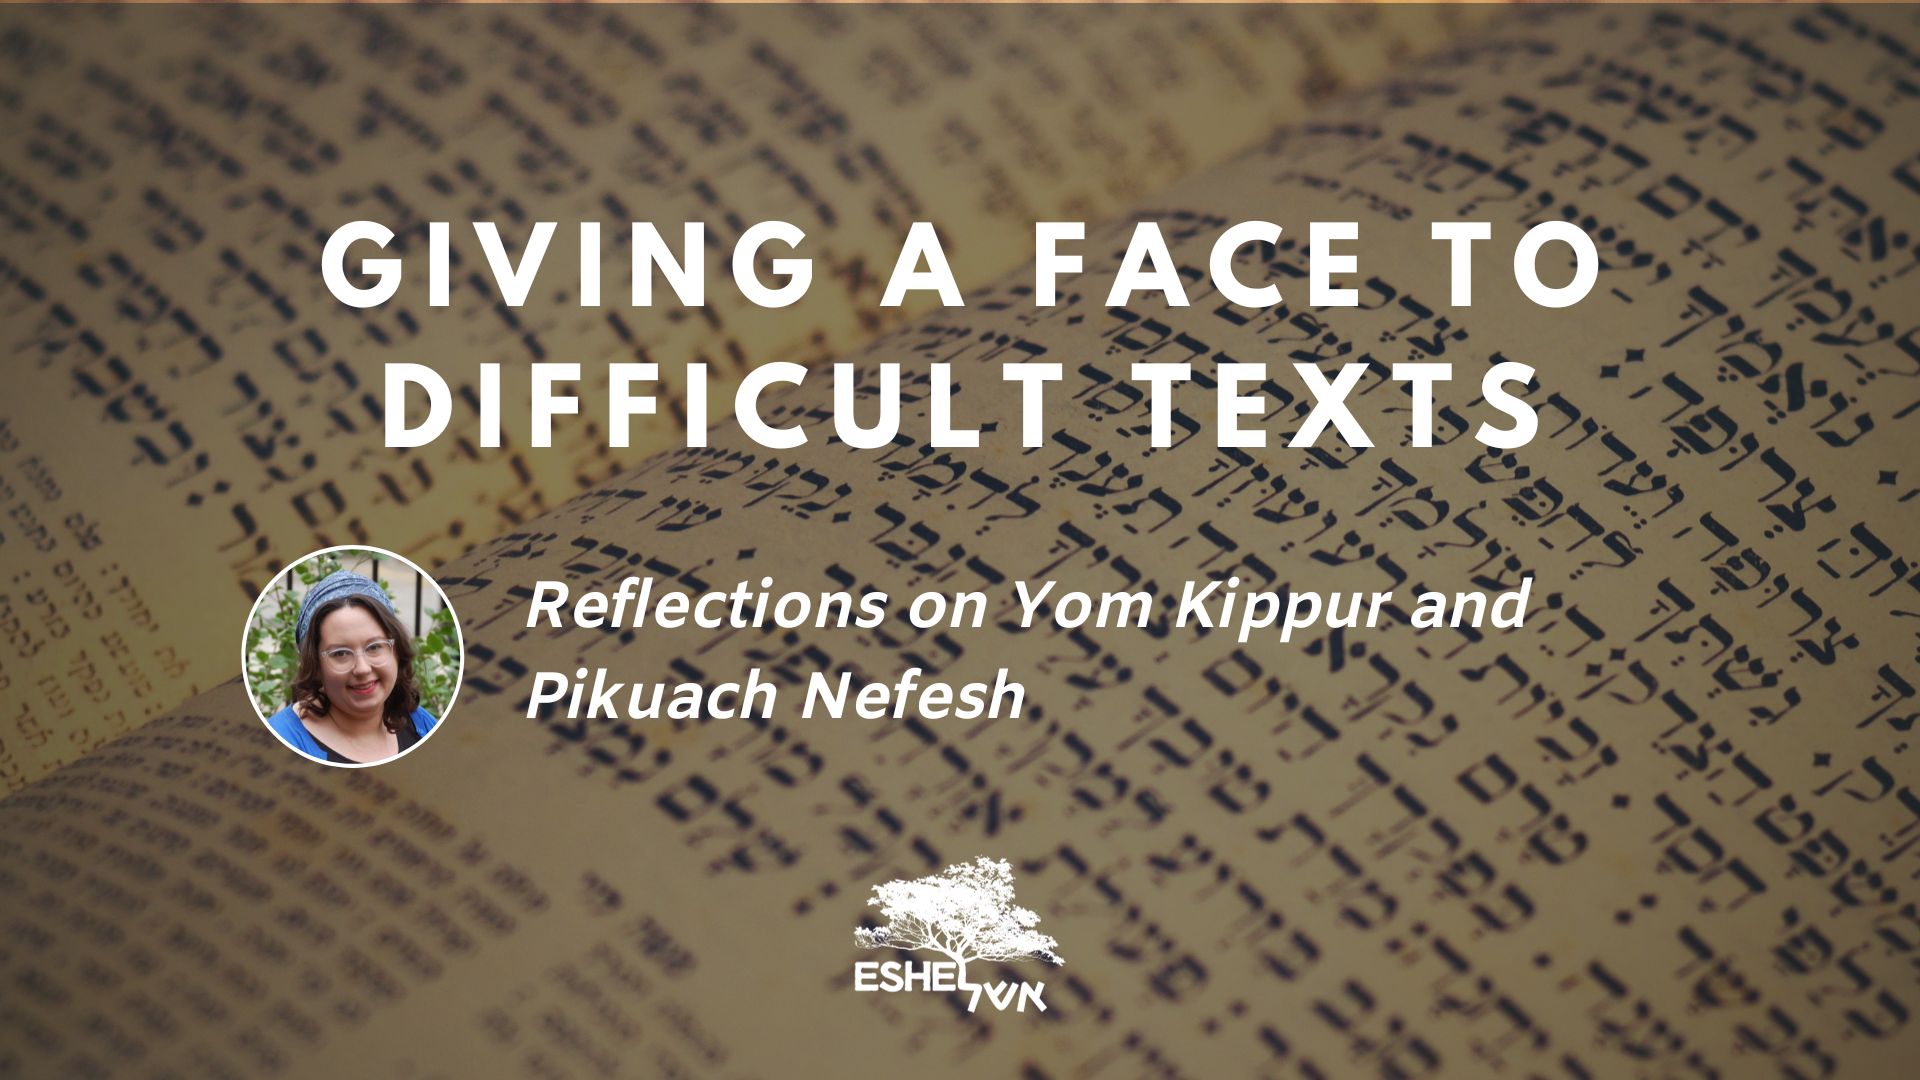 Giving a Face to Difficult Texts: Reflections on Yom Kippur and Pikuach Nefesh